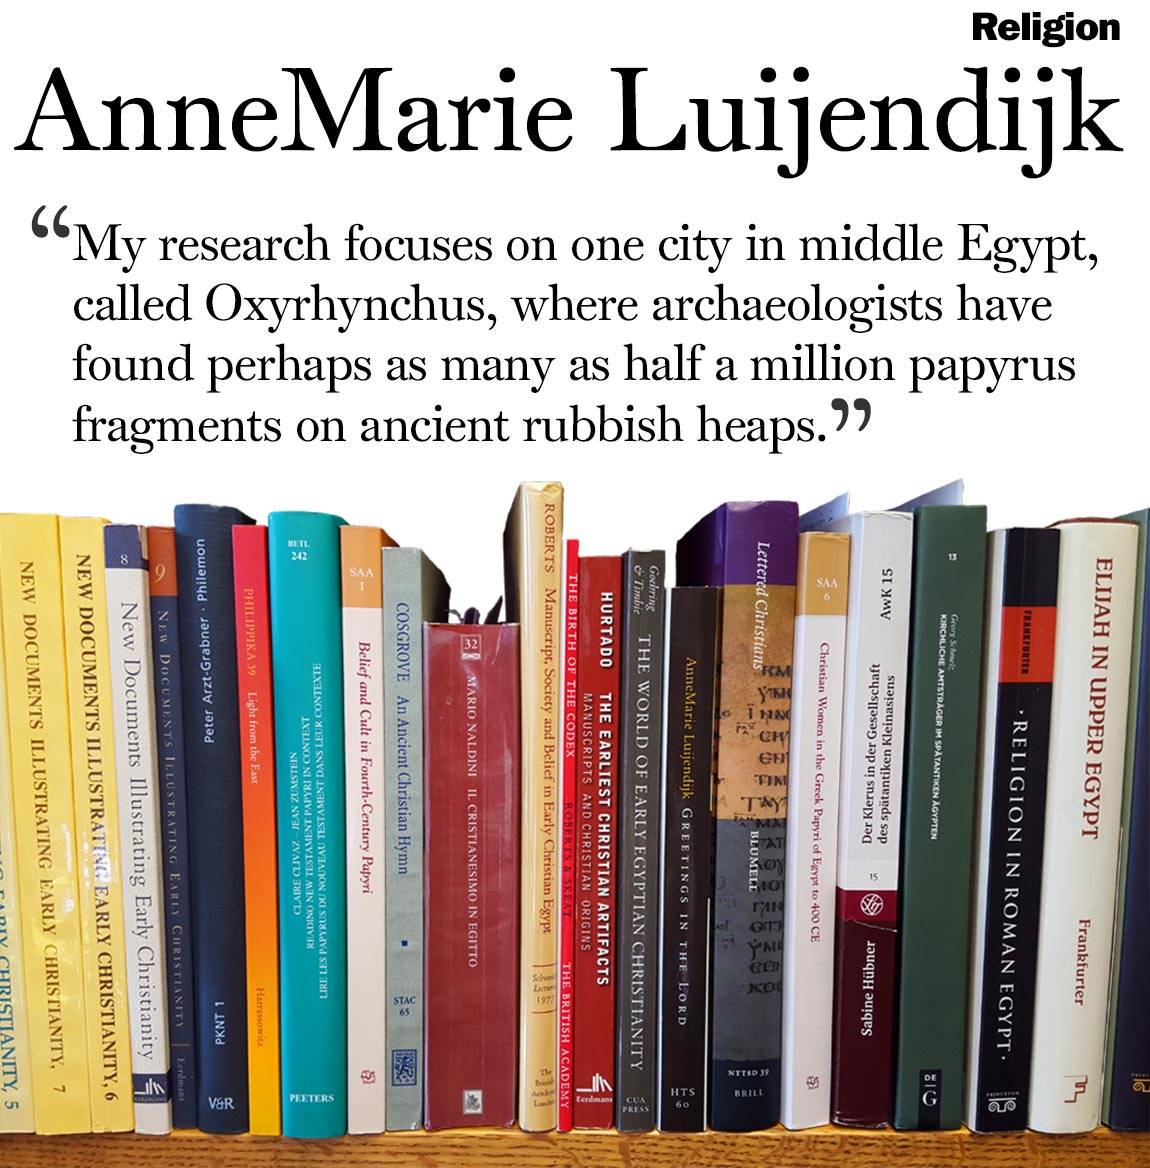 Faculty Bookshelves 2016 “Religion; AnneMarie Luijendijk; ‘My research focuses on one city in middle Egypt, called Oxyrhynchus, where archaeologists have found perhaps as many as half a million papyrus fragments on ancient rubbish heaps.’”